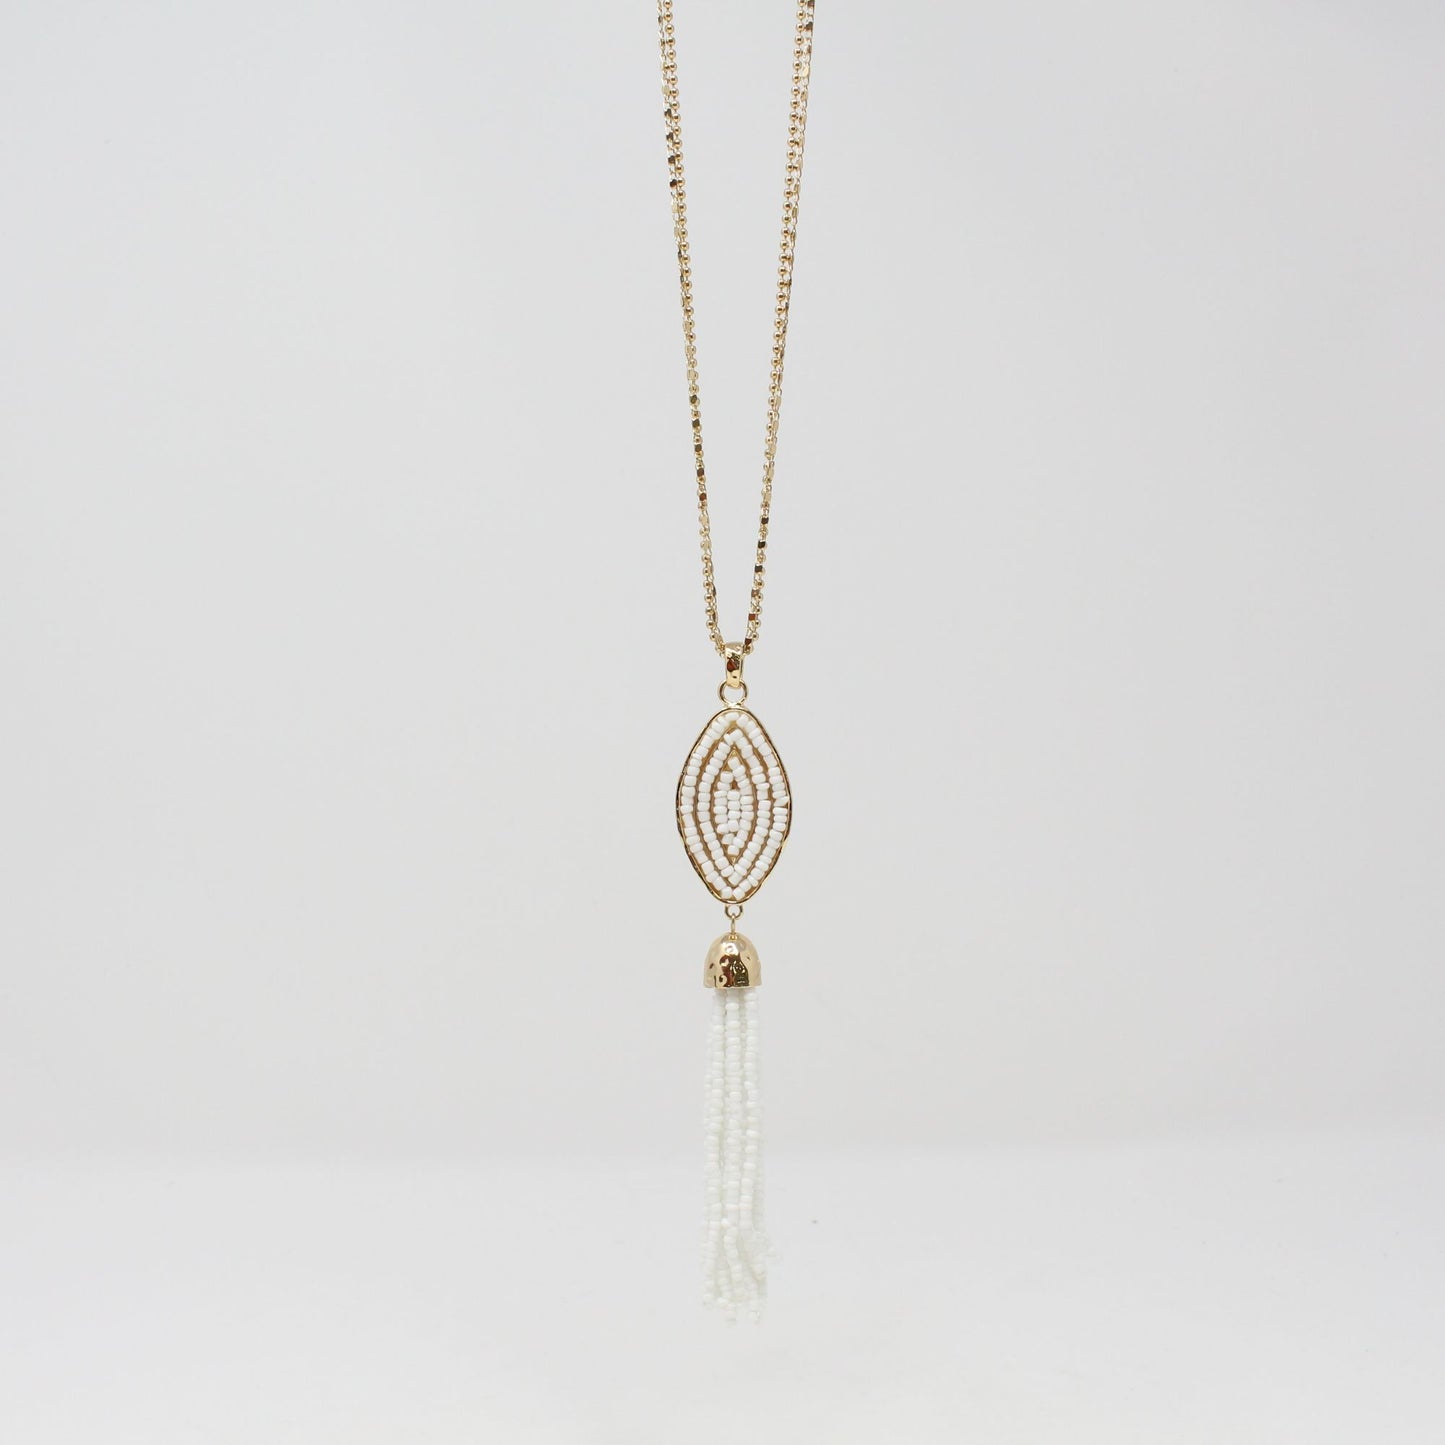 Style & Co Gold-Tone Seed Bead Tassel Long Pendant Necklace 32"